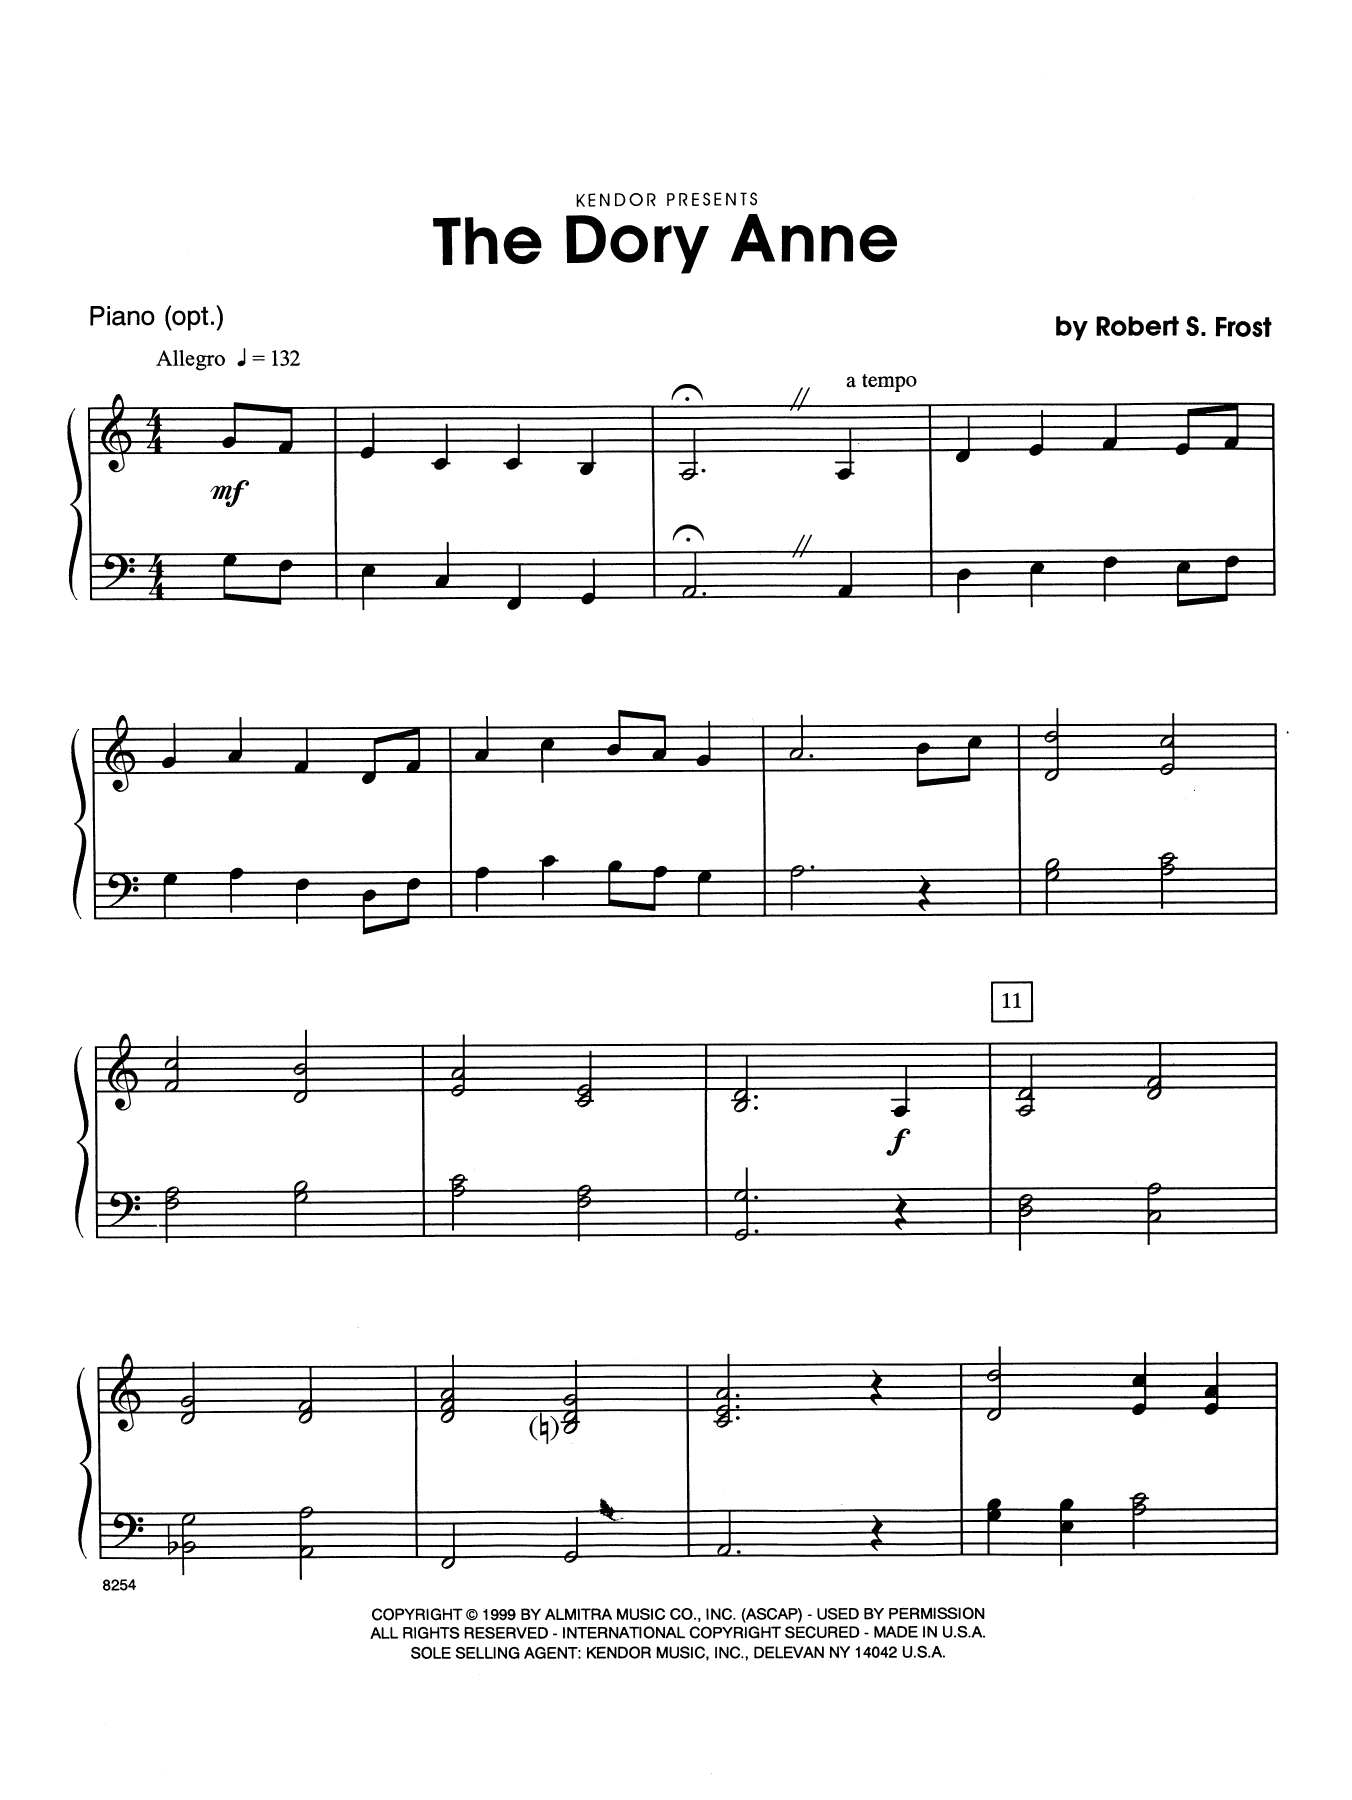 Download Robert S. Frost The Dory Anne - Piano Accompaniment Sheet Music